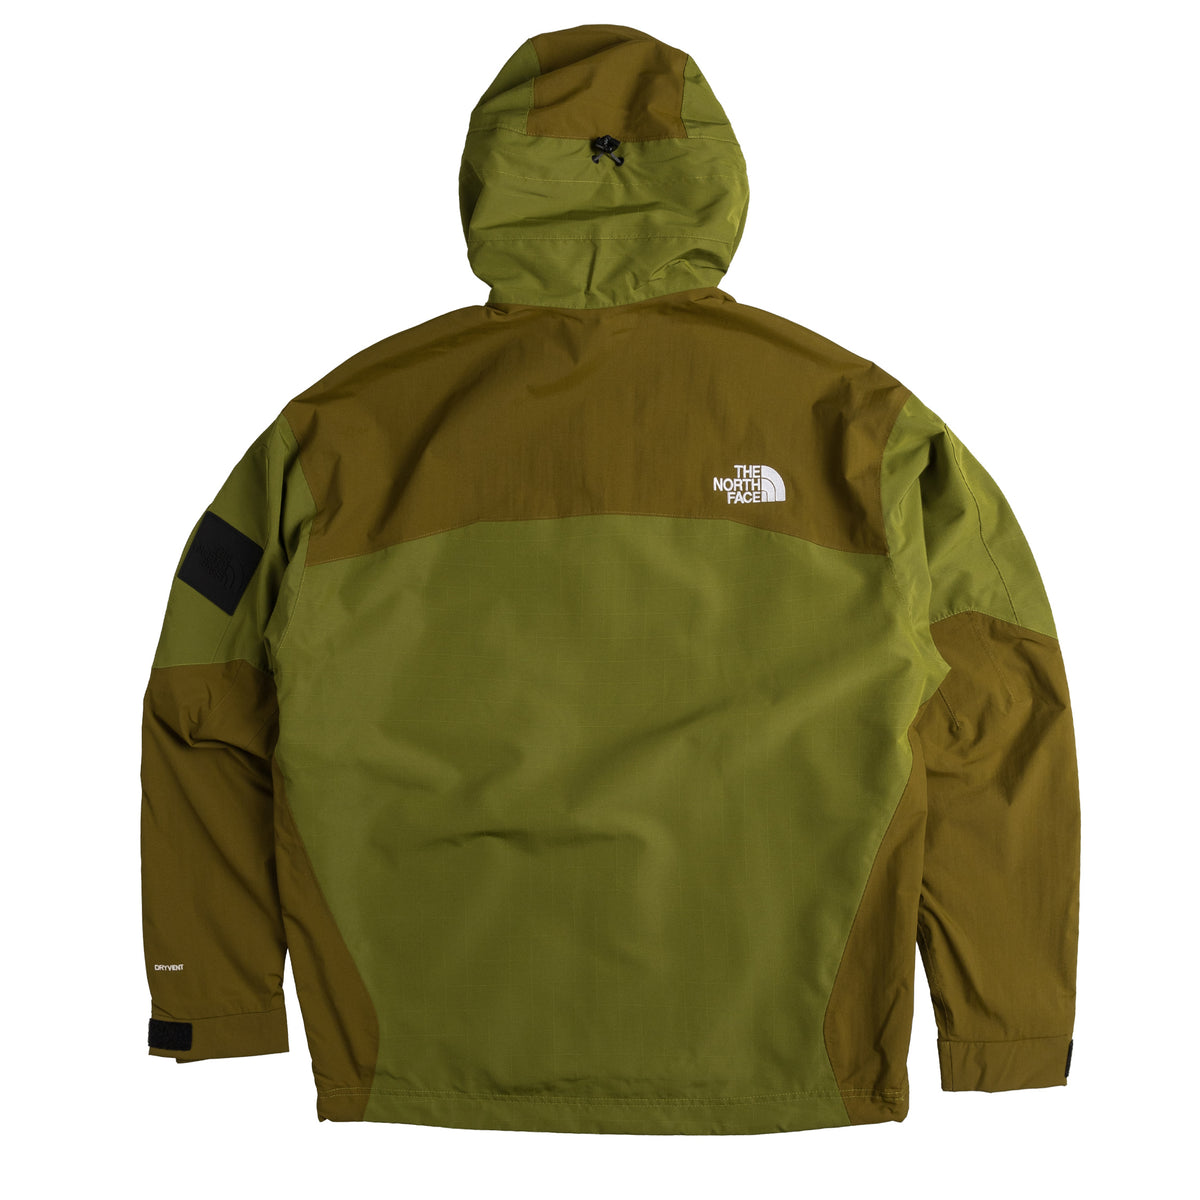 The North Face Transverse Dryvent Jacket » Buy online now!